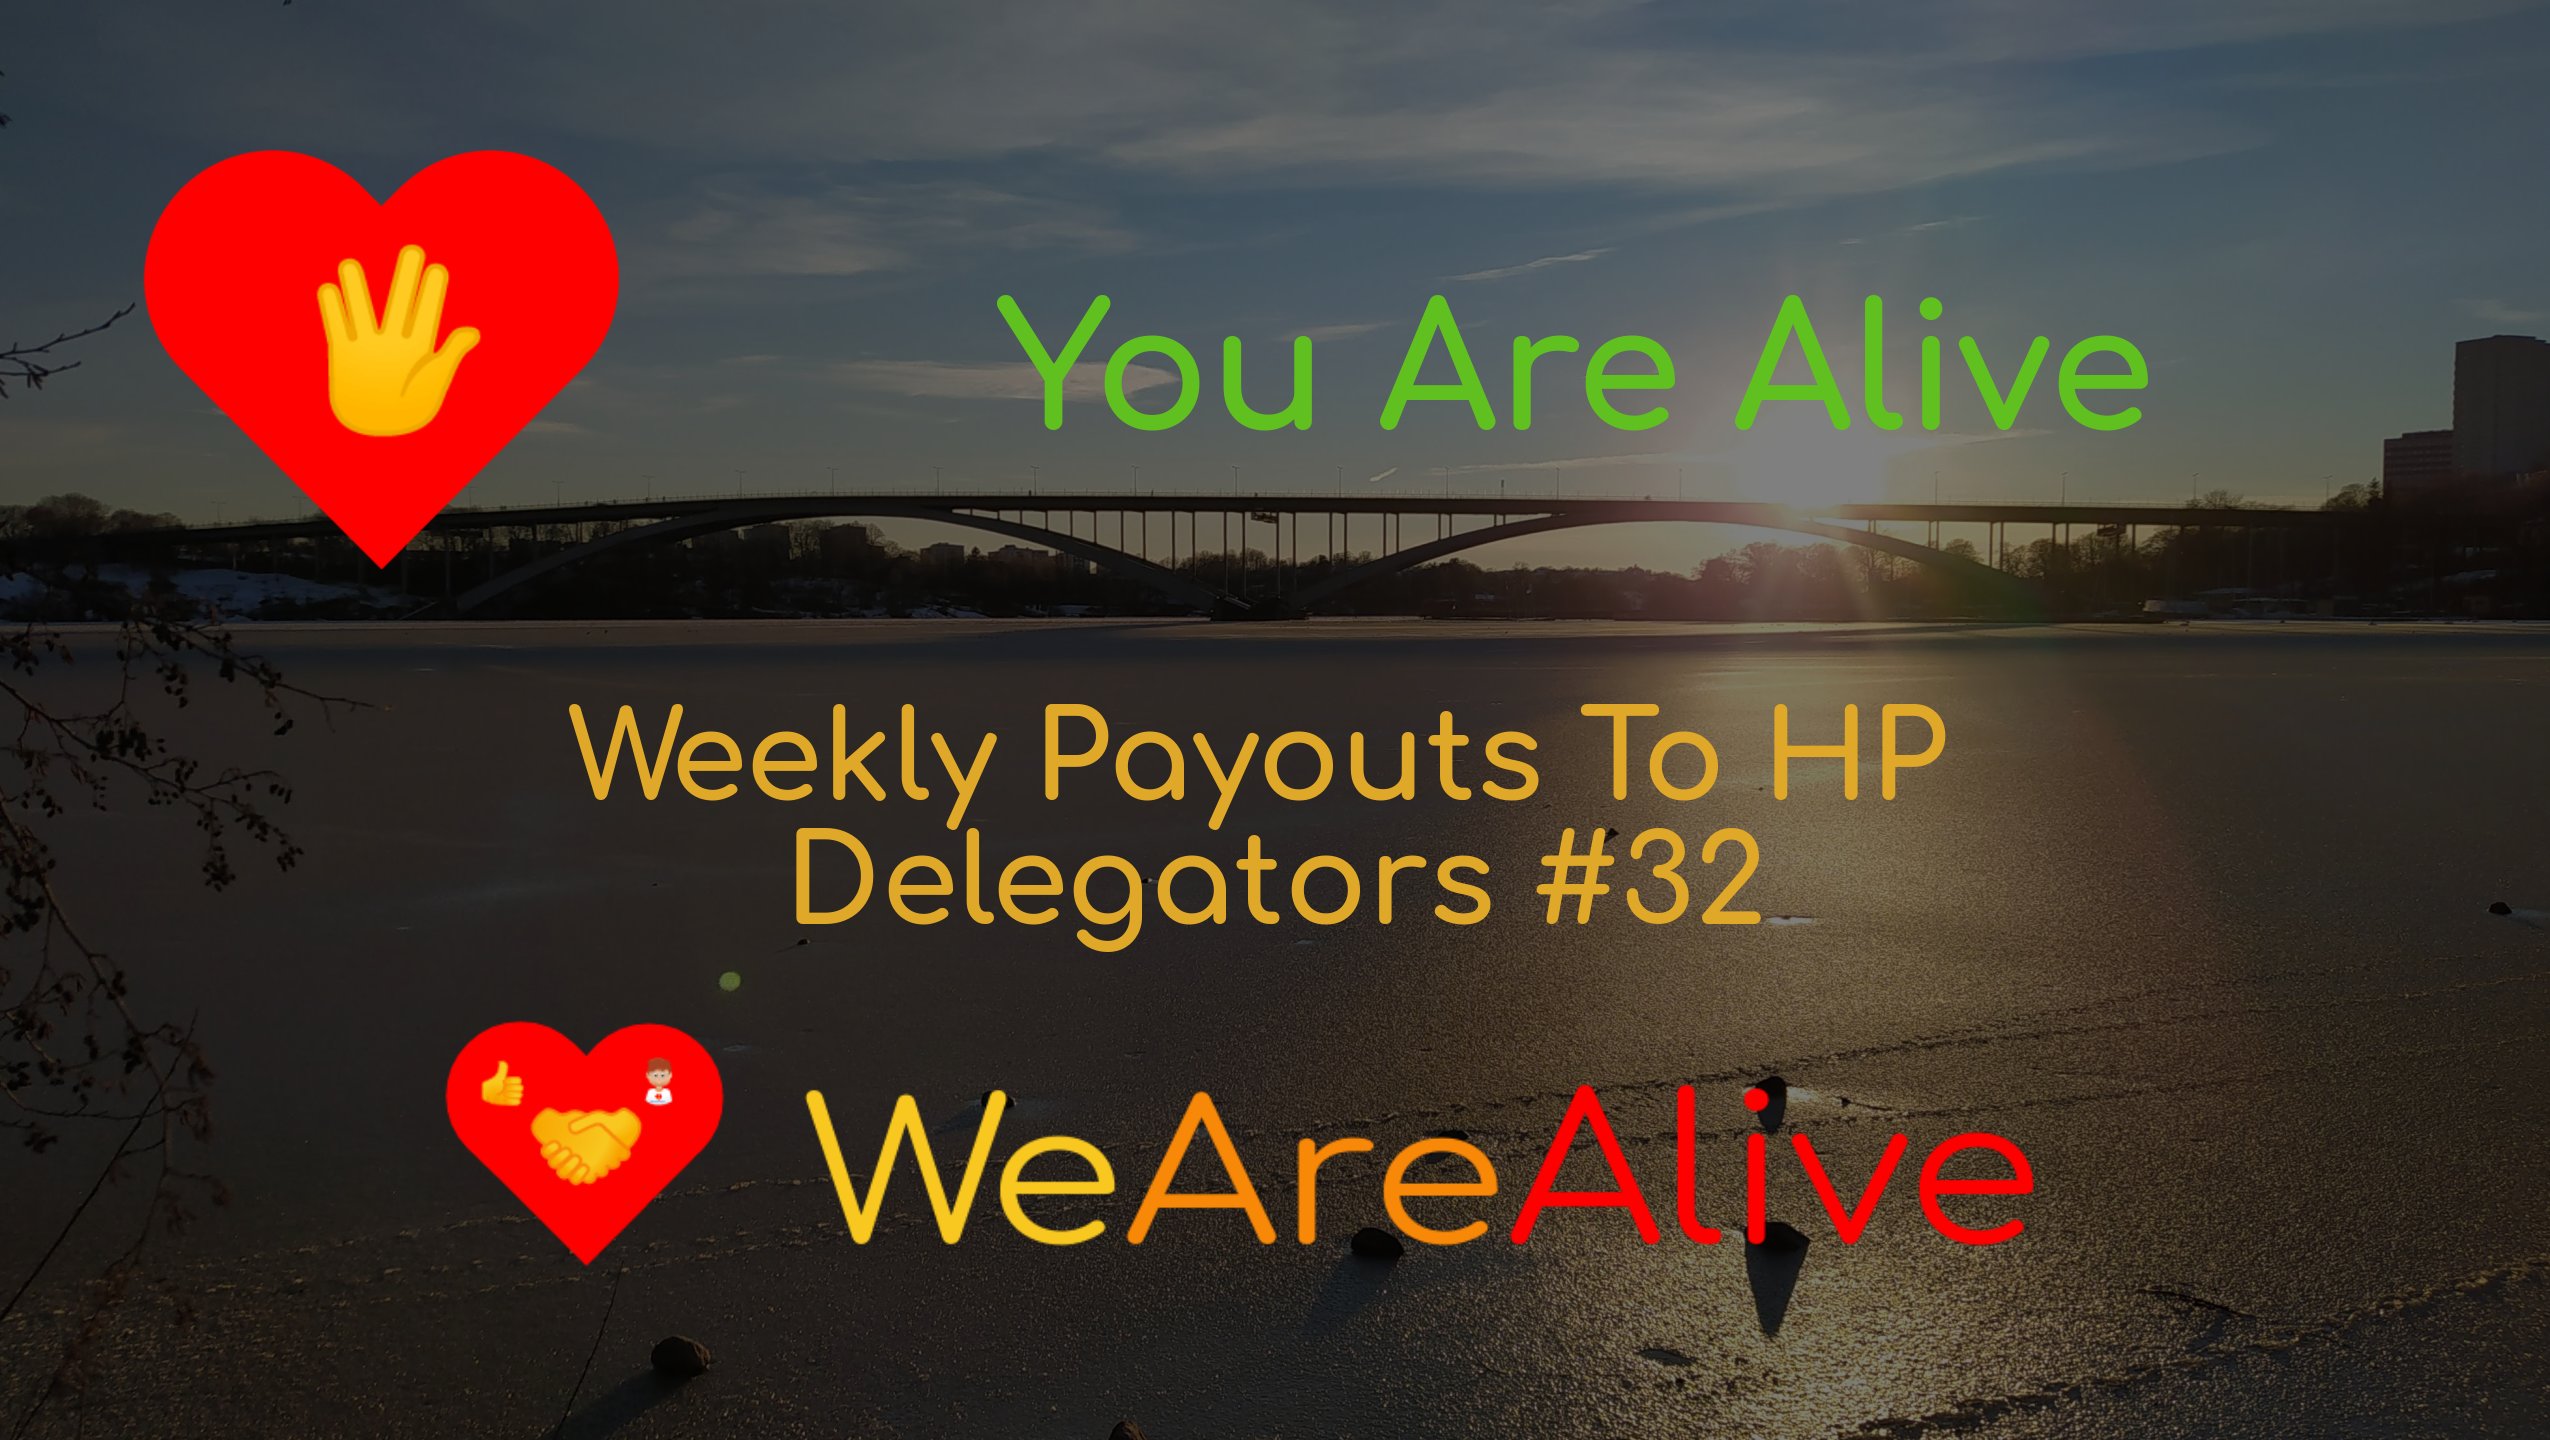 @youarealive/you-are-alive-weekly-payouts-to-hp-delegators-32